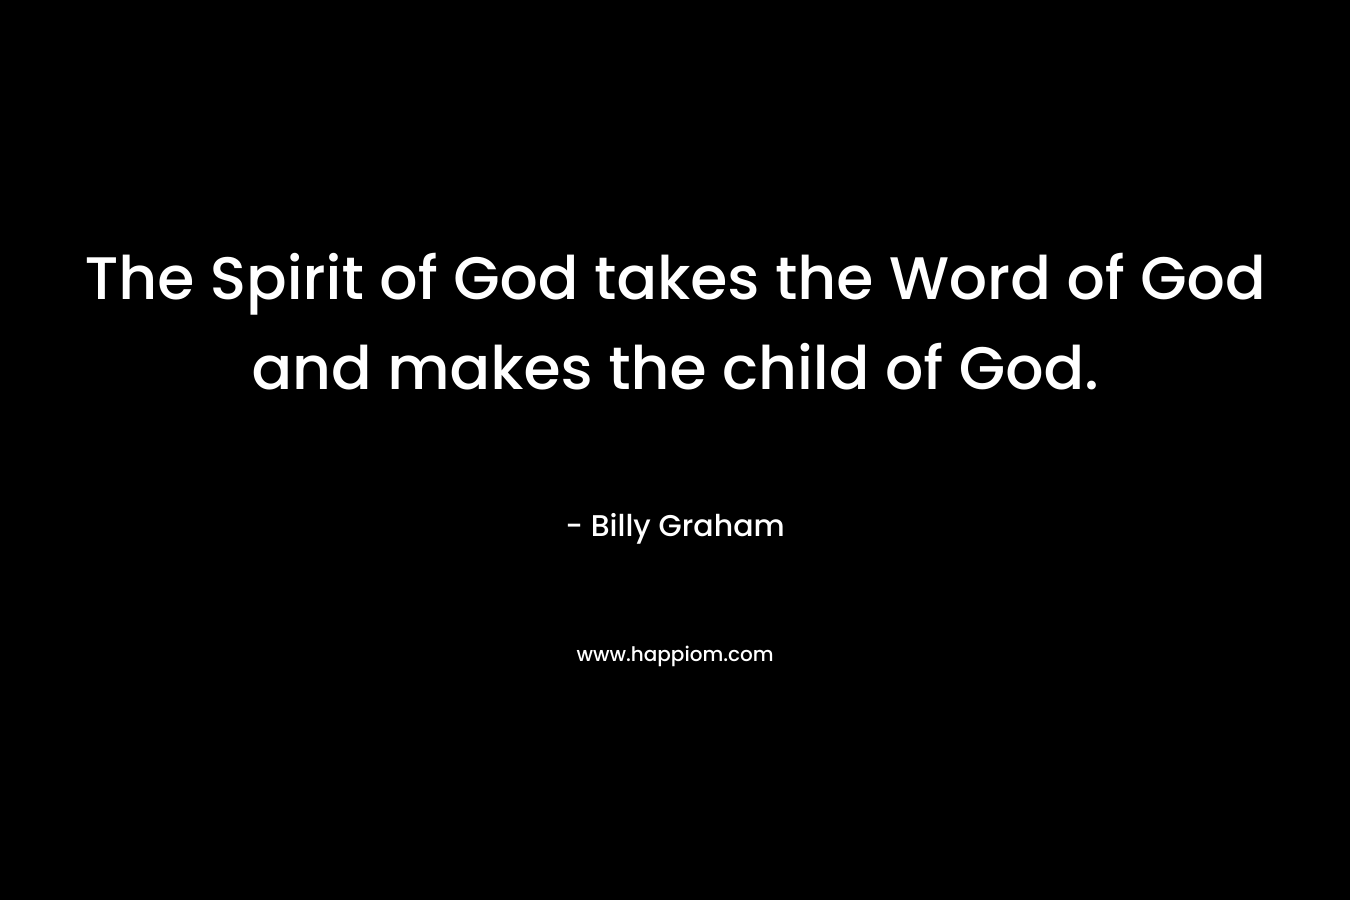 The Spirit of God takes the Word of God and makes the child of God.